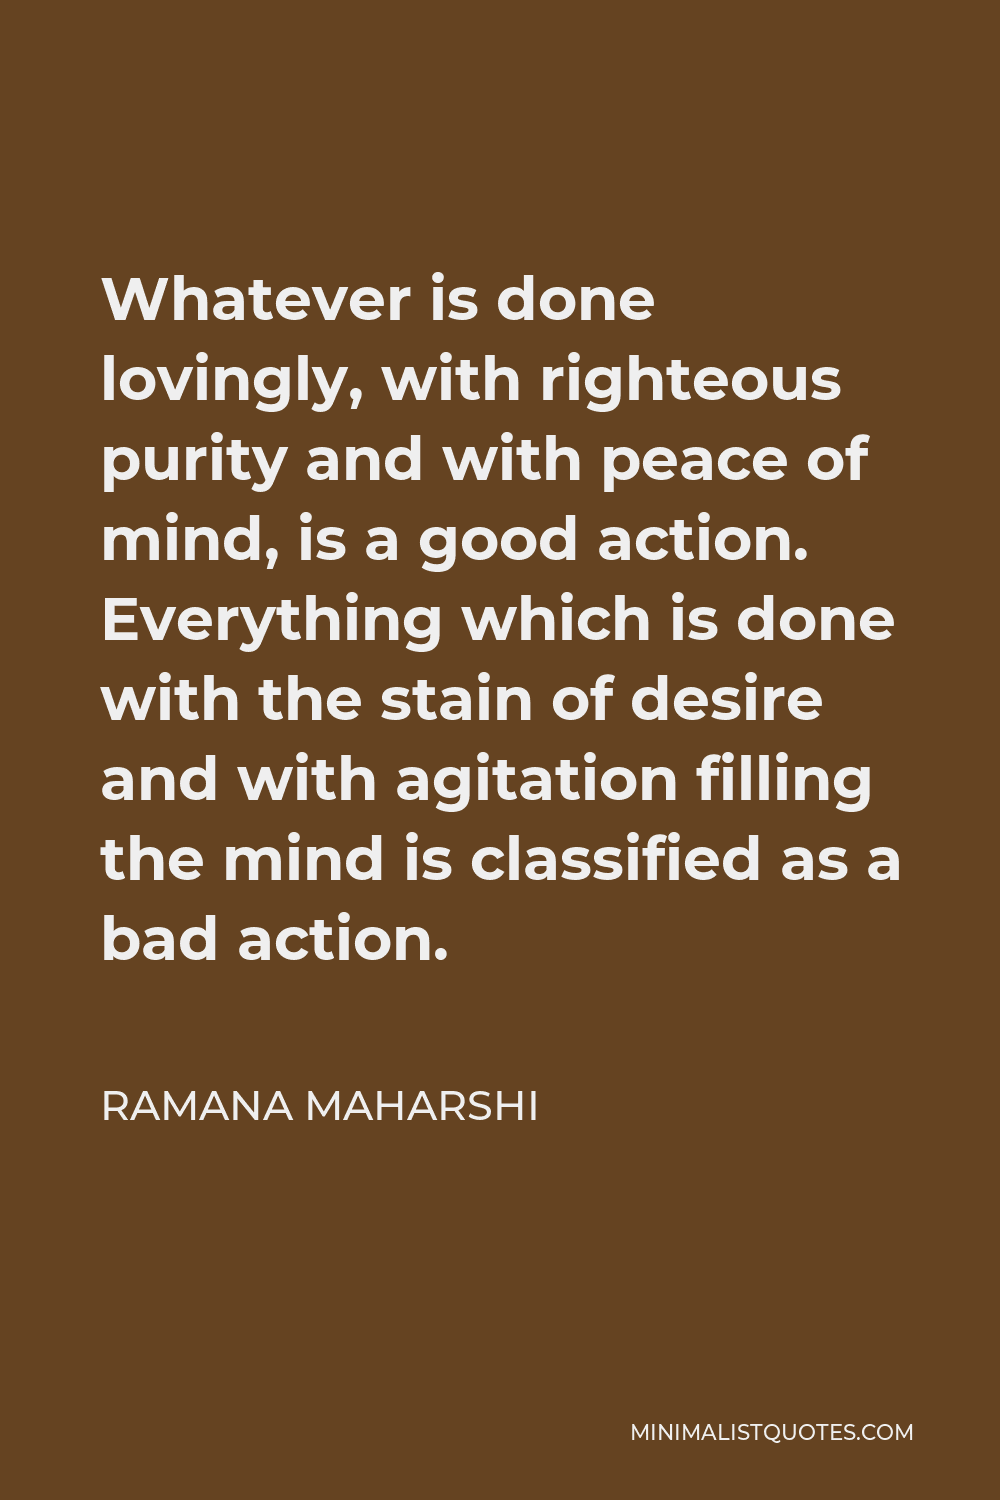 Ramana Maharshi Quote - Whatever is done lovingly, with righteous purity and with peace of mind, is a good action. Everything which is done with the stain of desire and with agitation filling the mind is classified as a bad action.